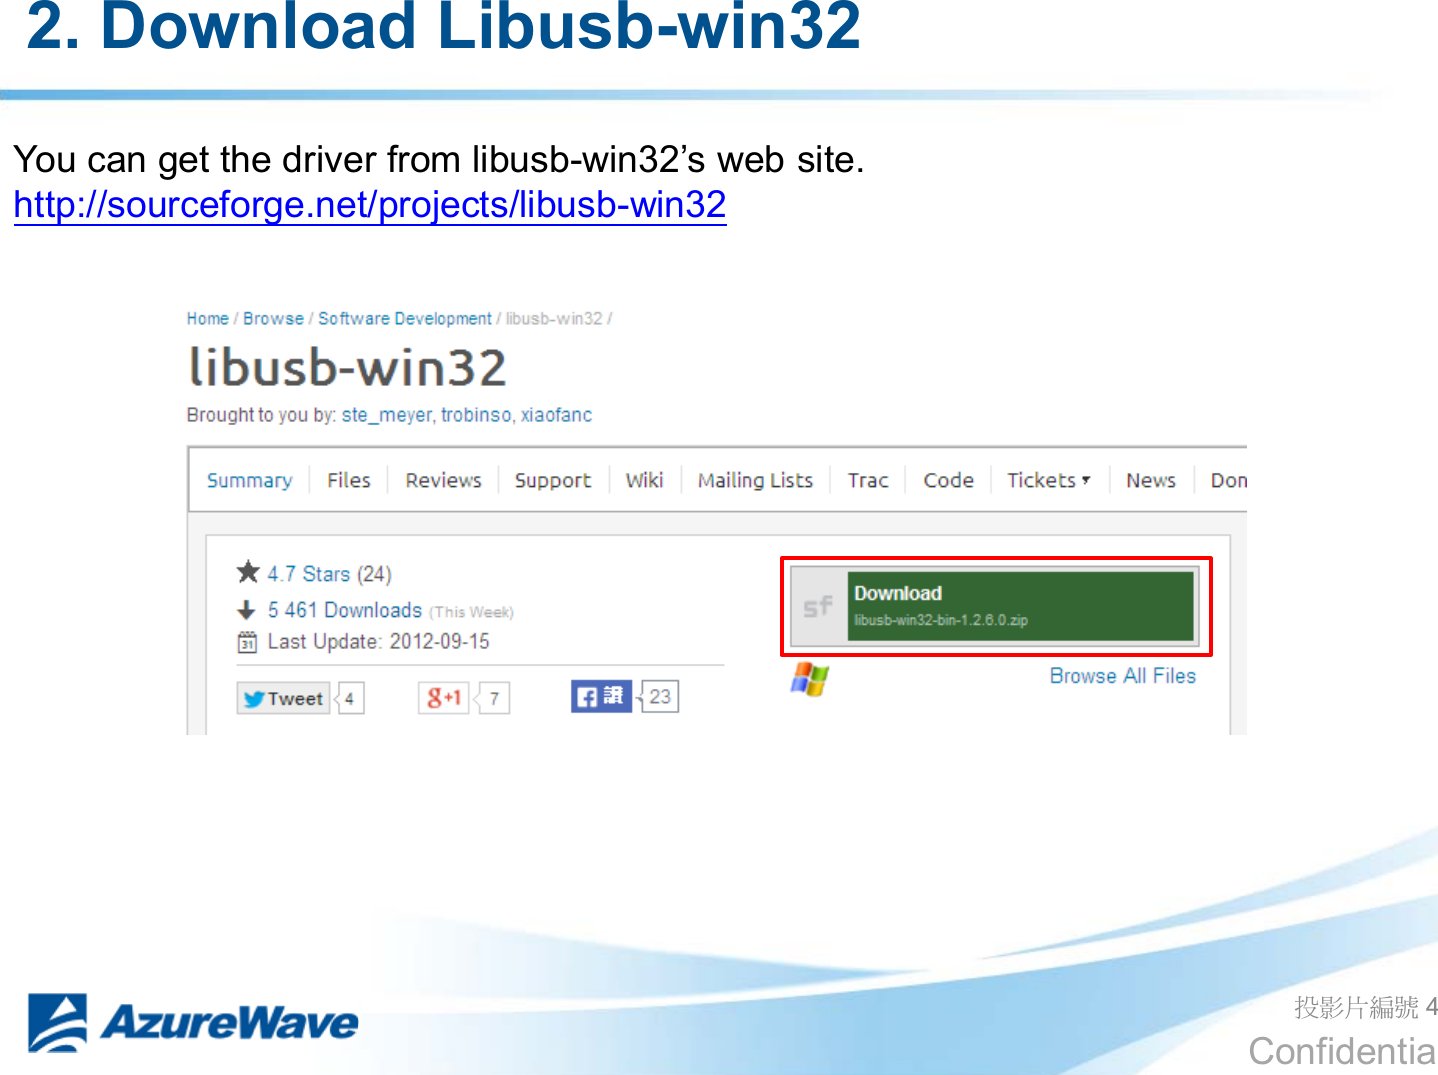 Confidential 2. Download Libusb-win32 ދᐙׂᒳᇆ 4 You can get the driver from libusb-ZLQ¶VZHEVLWH http://sourceforge.net/projects/libusb-win32  